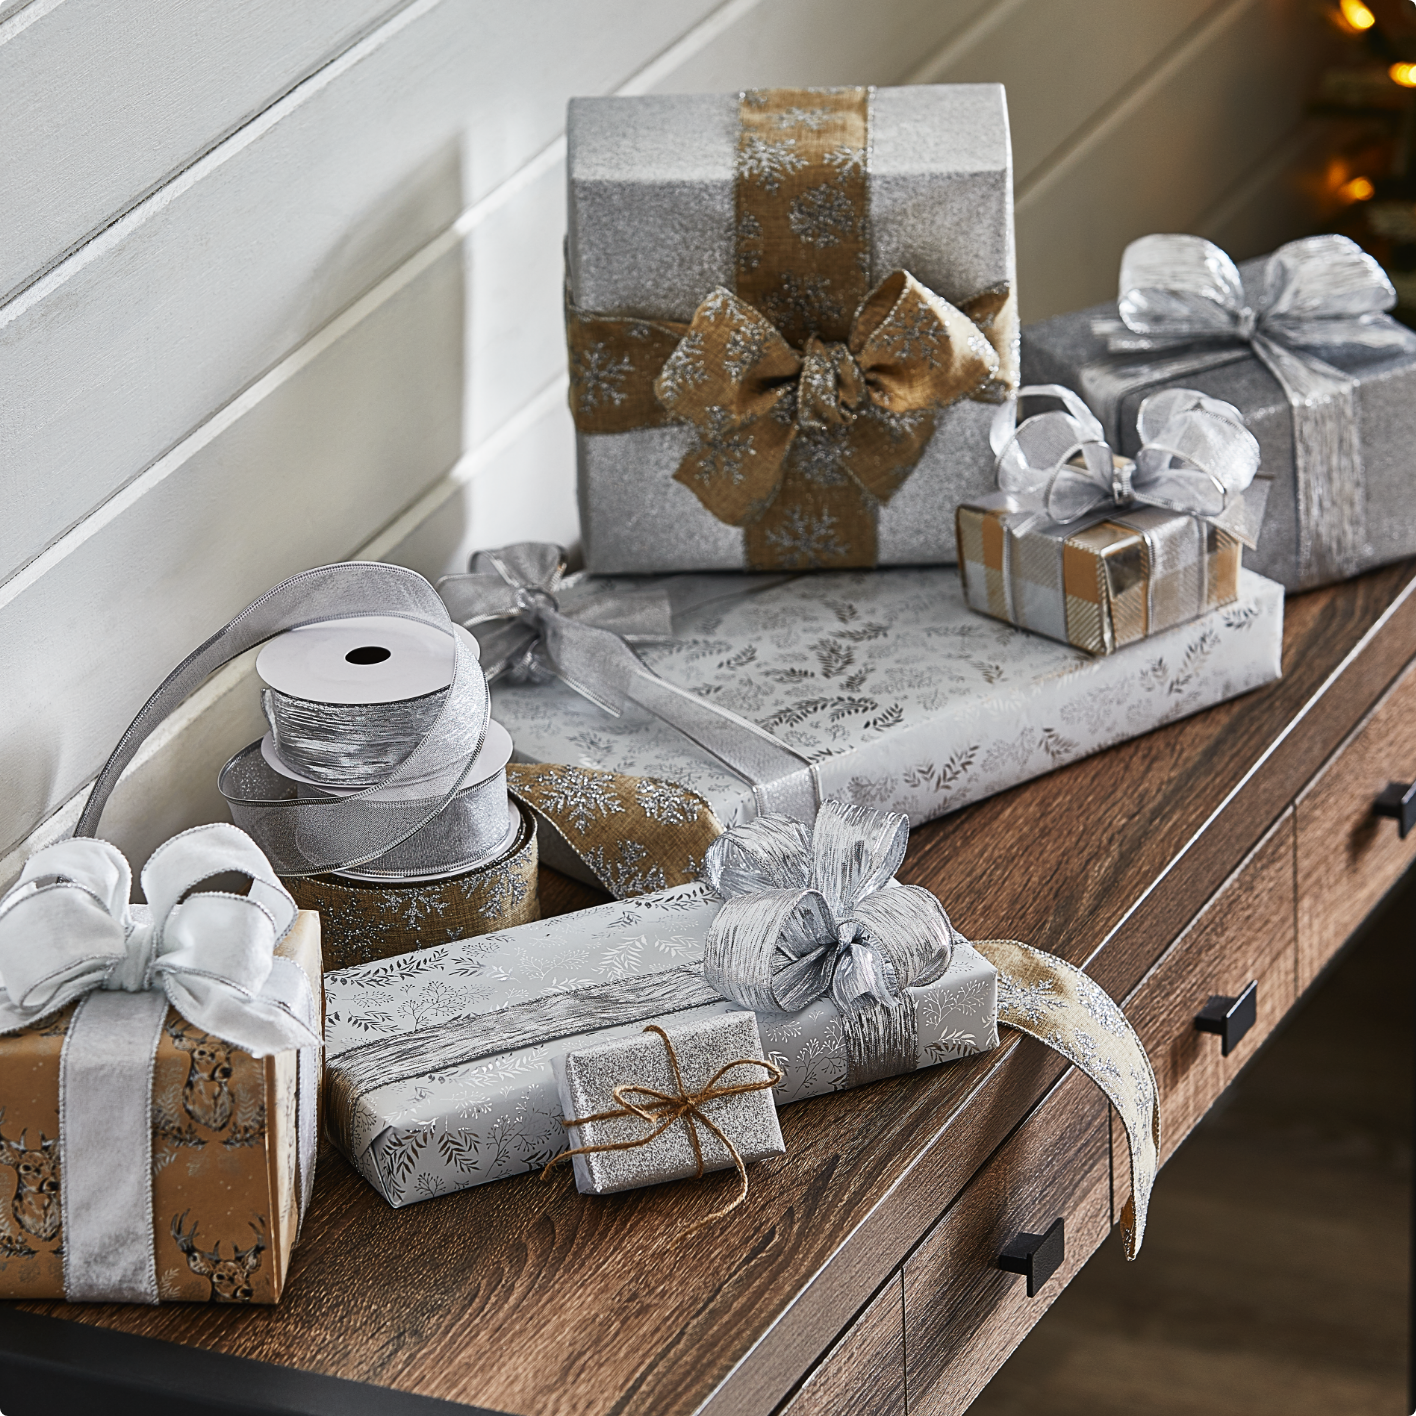 Silver gift wrapping accessories on a table